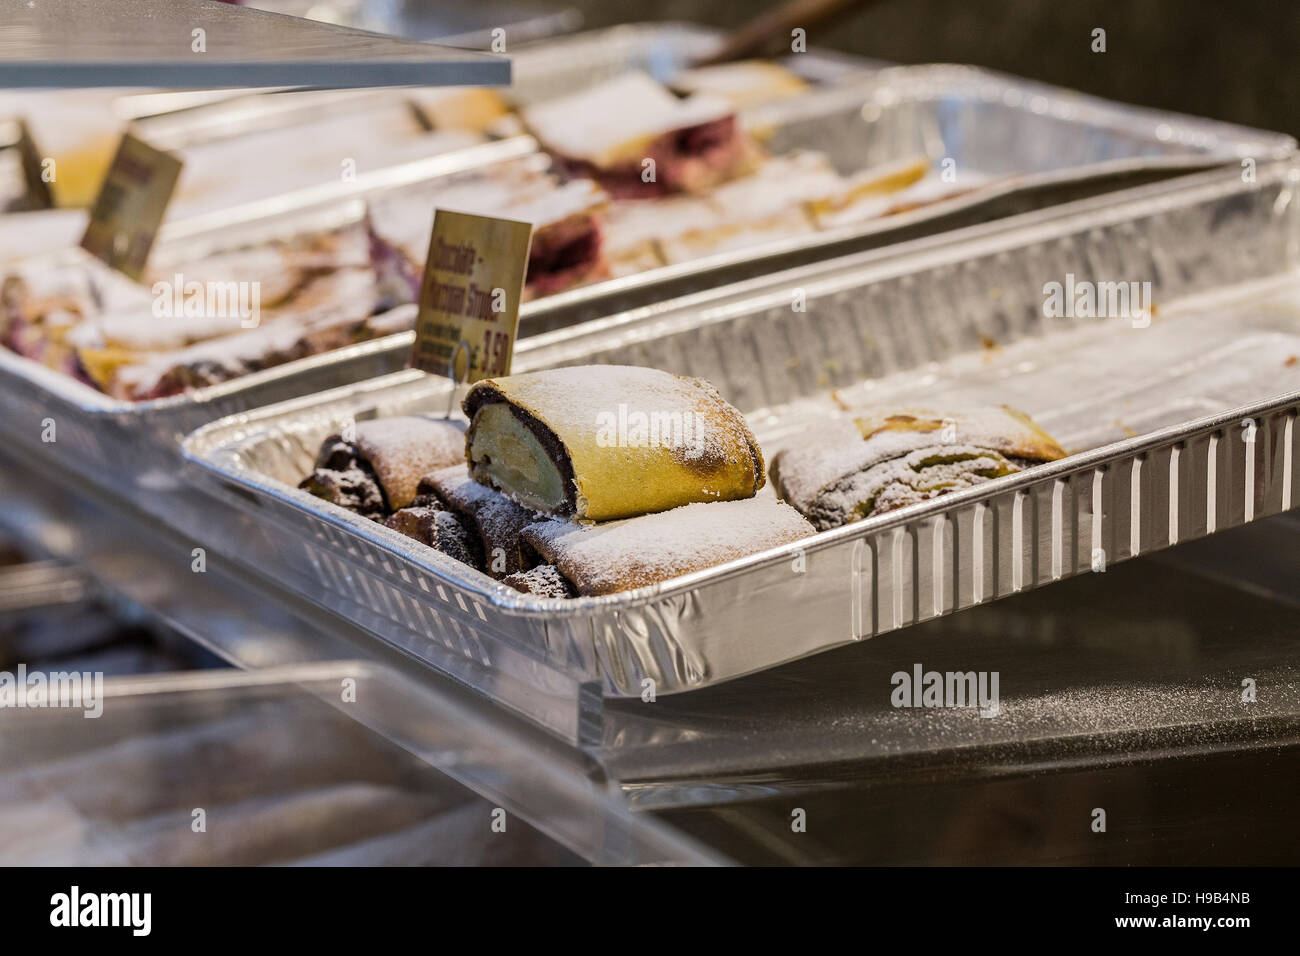 Trays of delicacies on servery including chocolate dusted strudel with price card Stock Photo